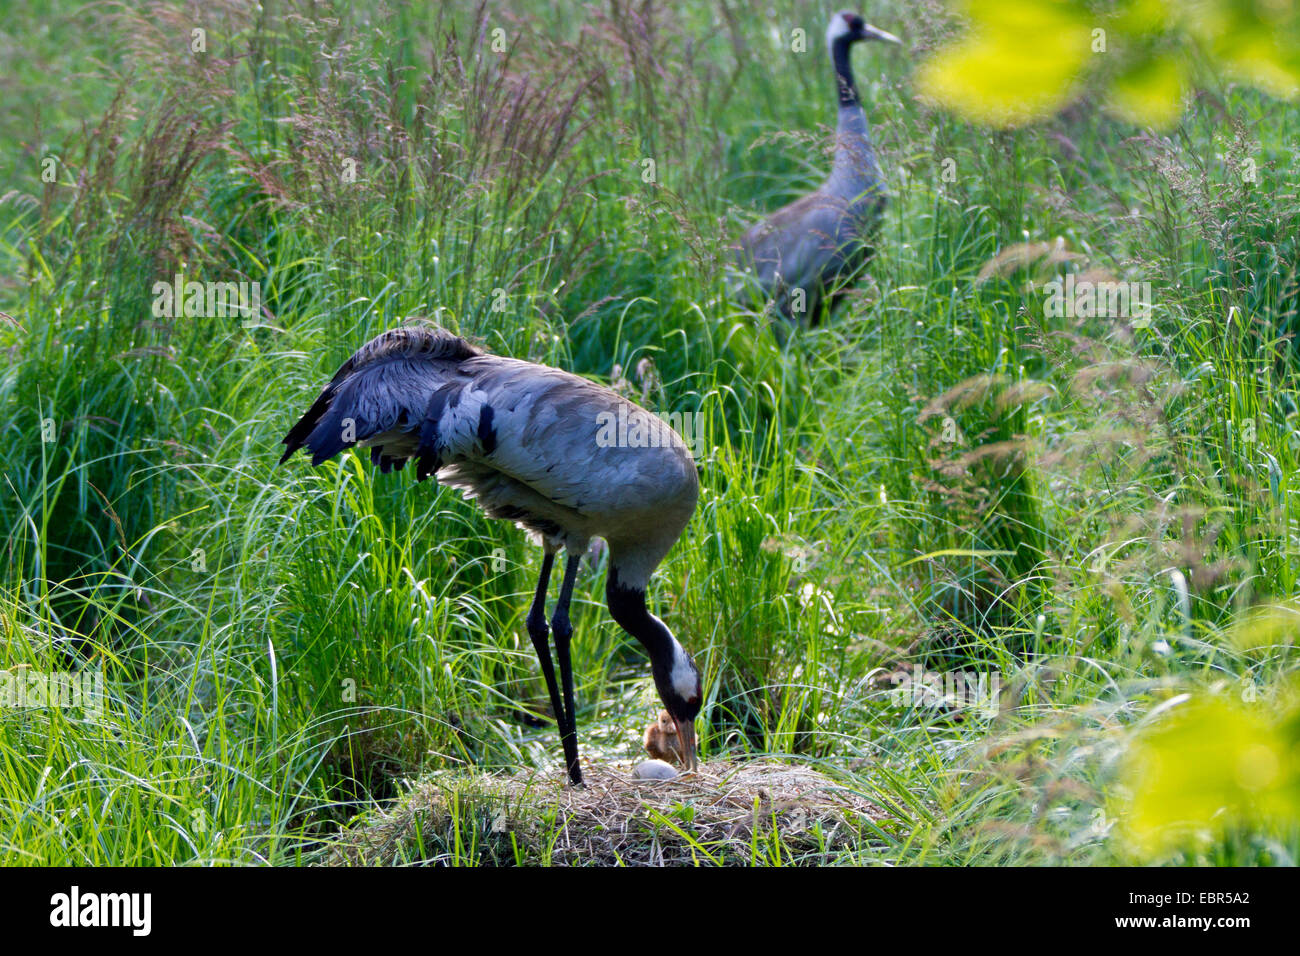 Common crane, Eurasian Crane (Grus grus), parents at the nest with chick and egg, Germany, Mecklenburg-Western Pomerania Stock Photo